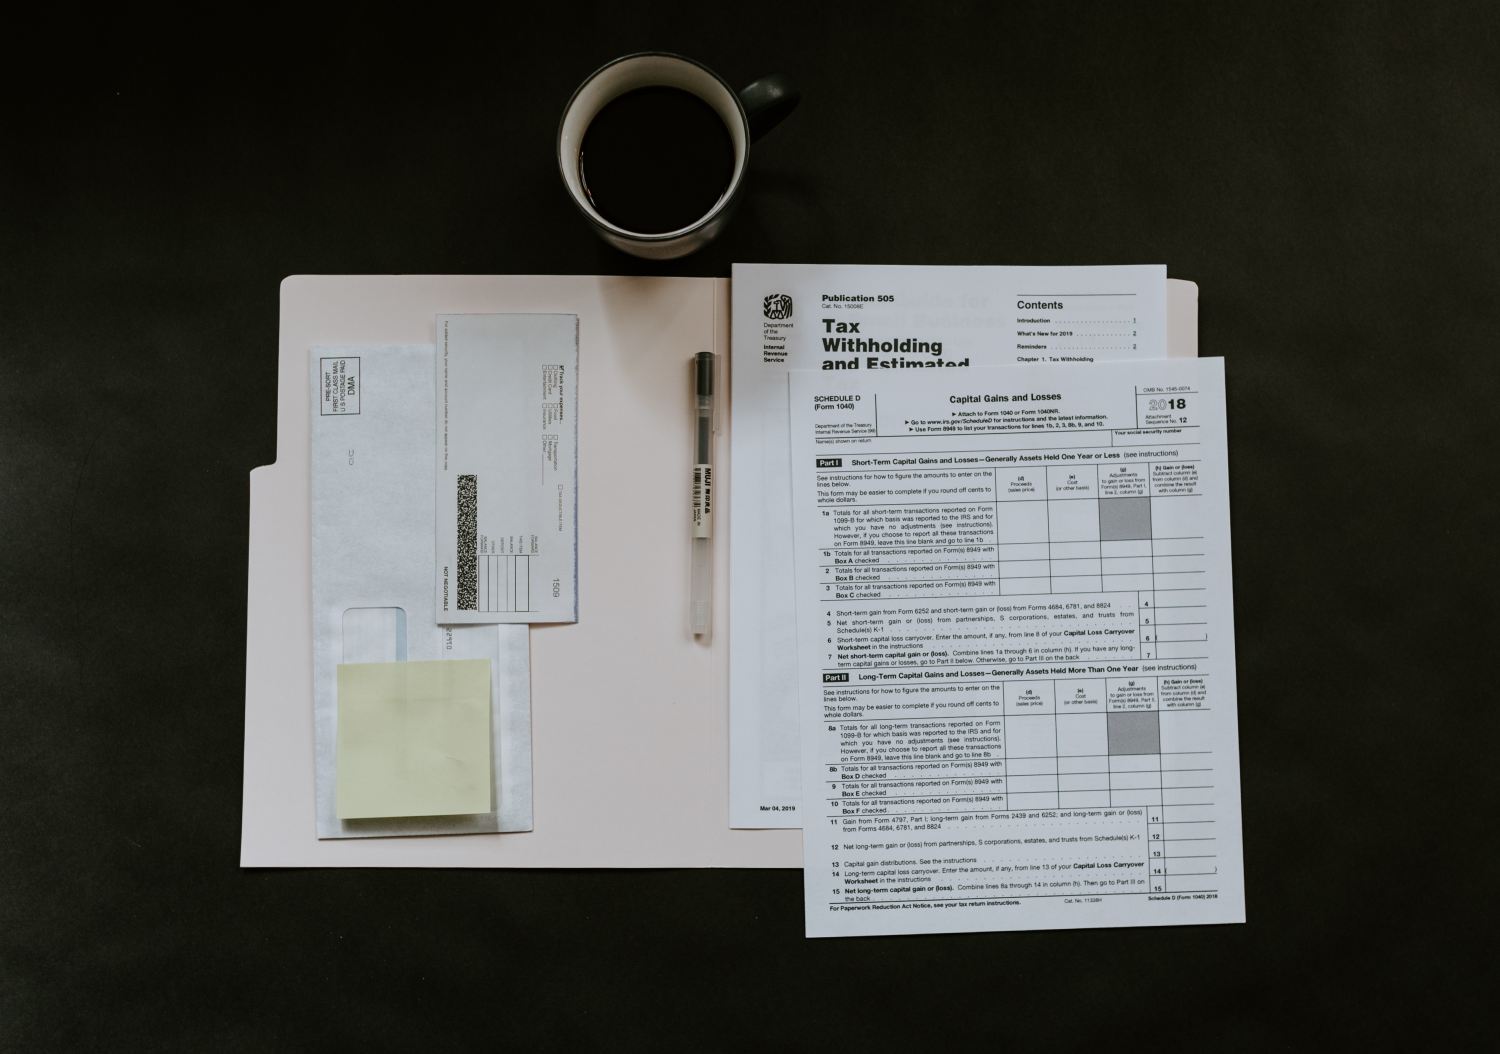 Photo of tax paperwork. By Kelly Sikkema on Unsplash